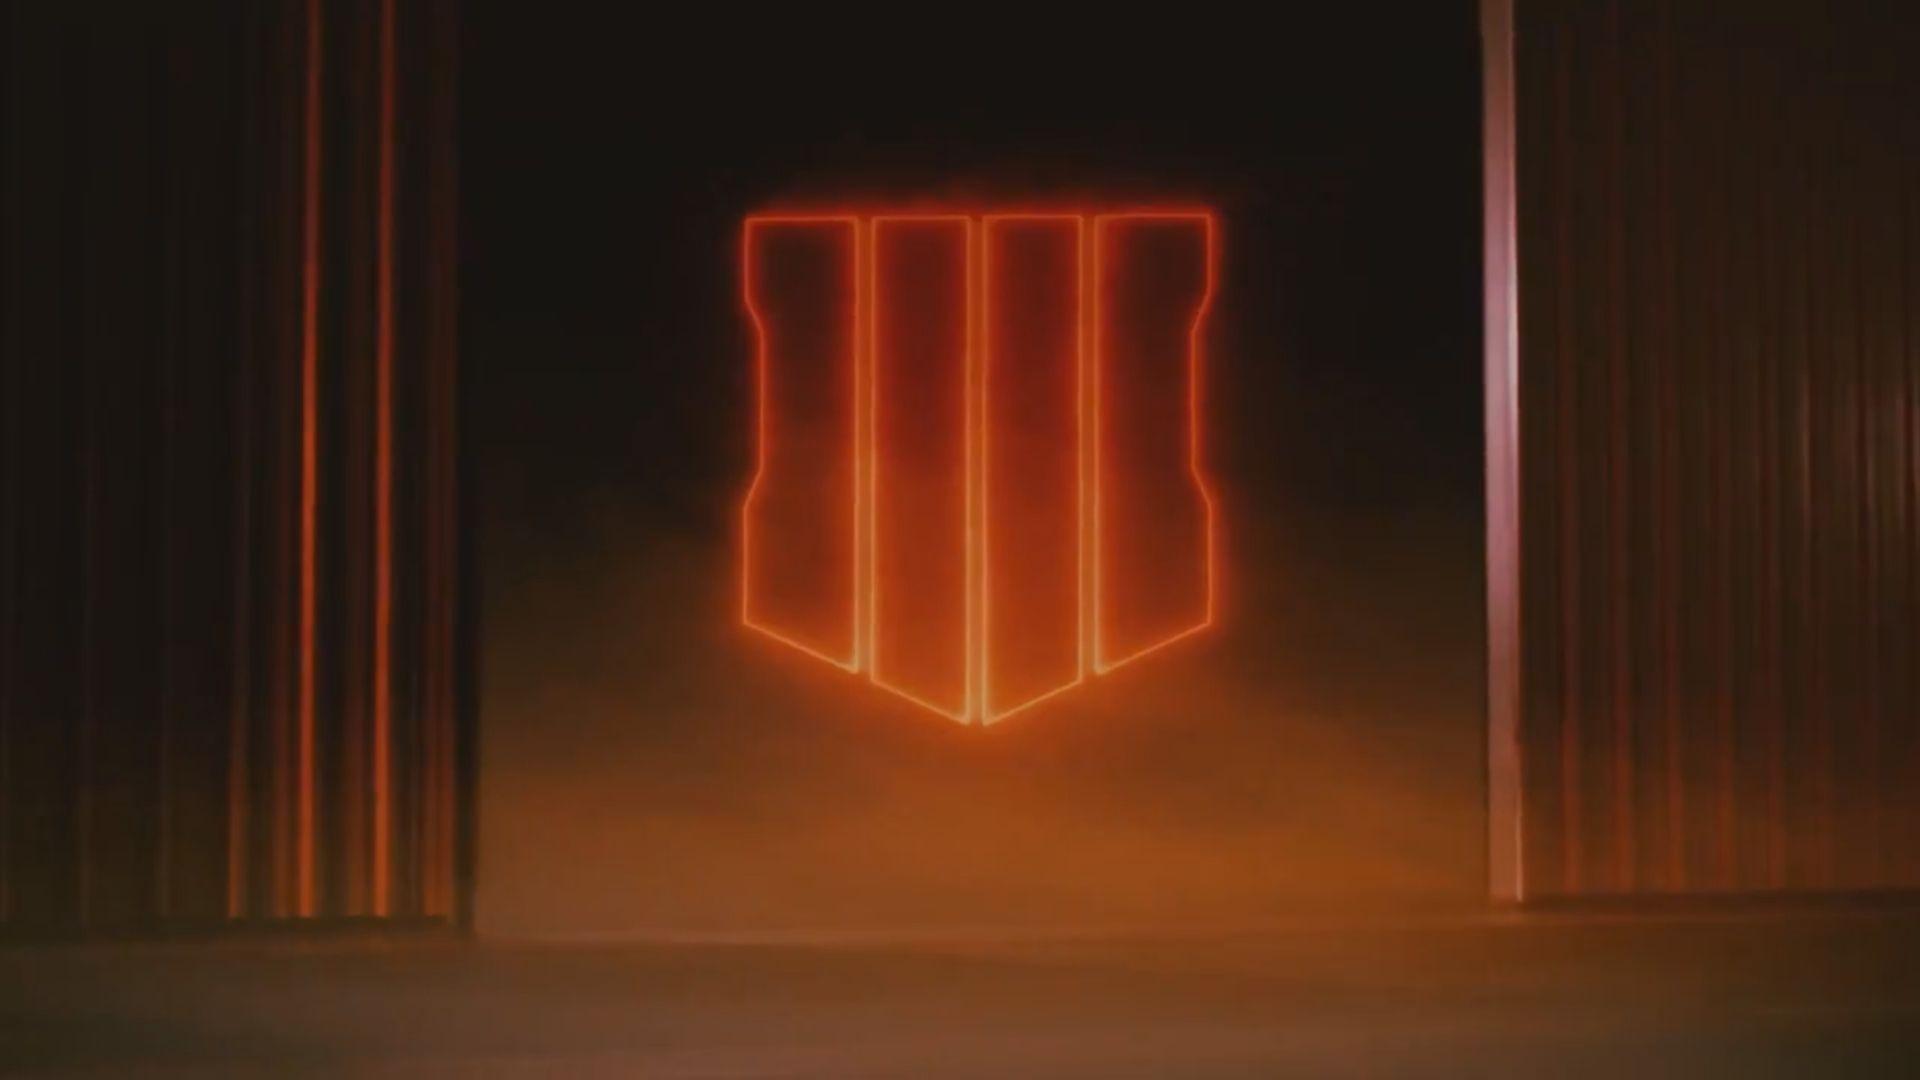 Call of Duty: Black Ops 4 box art leaks just 12 hours before reveal